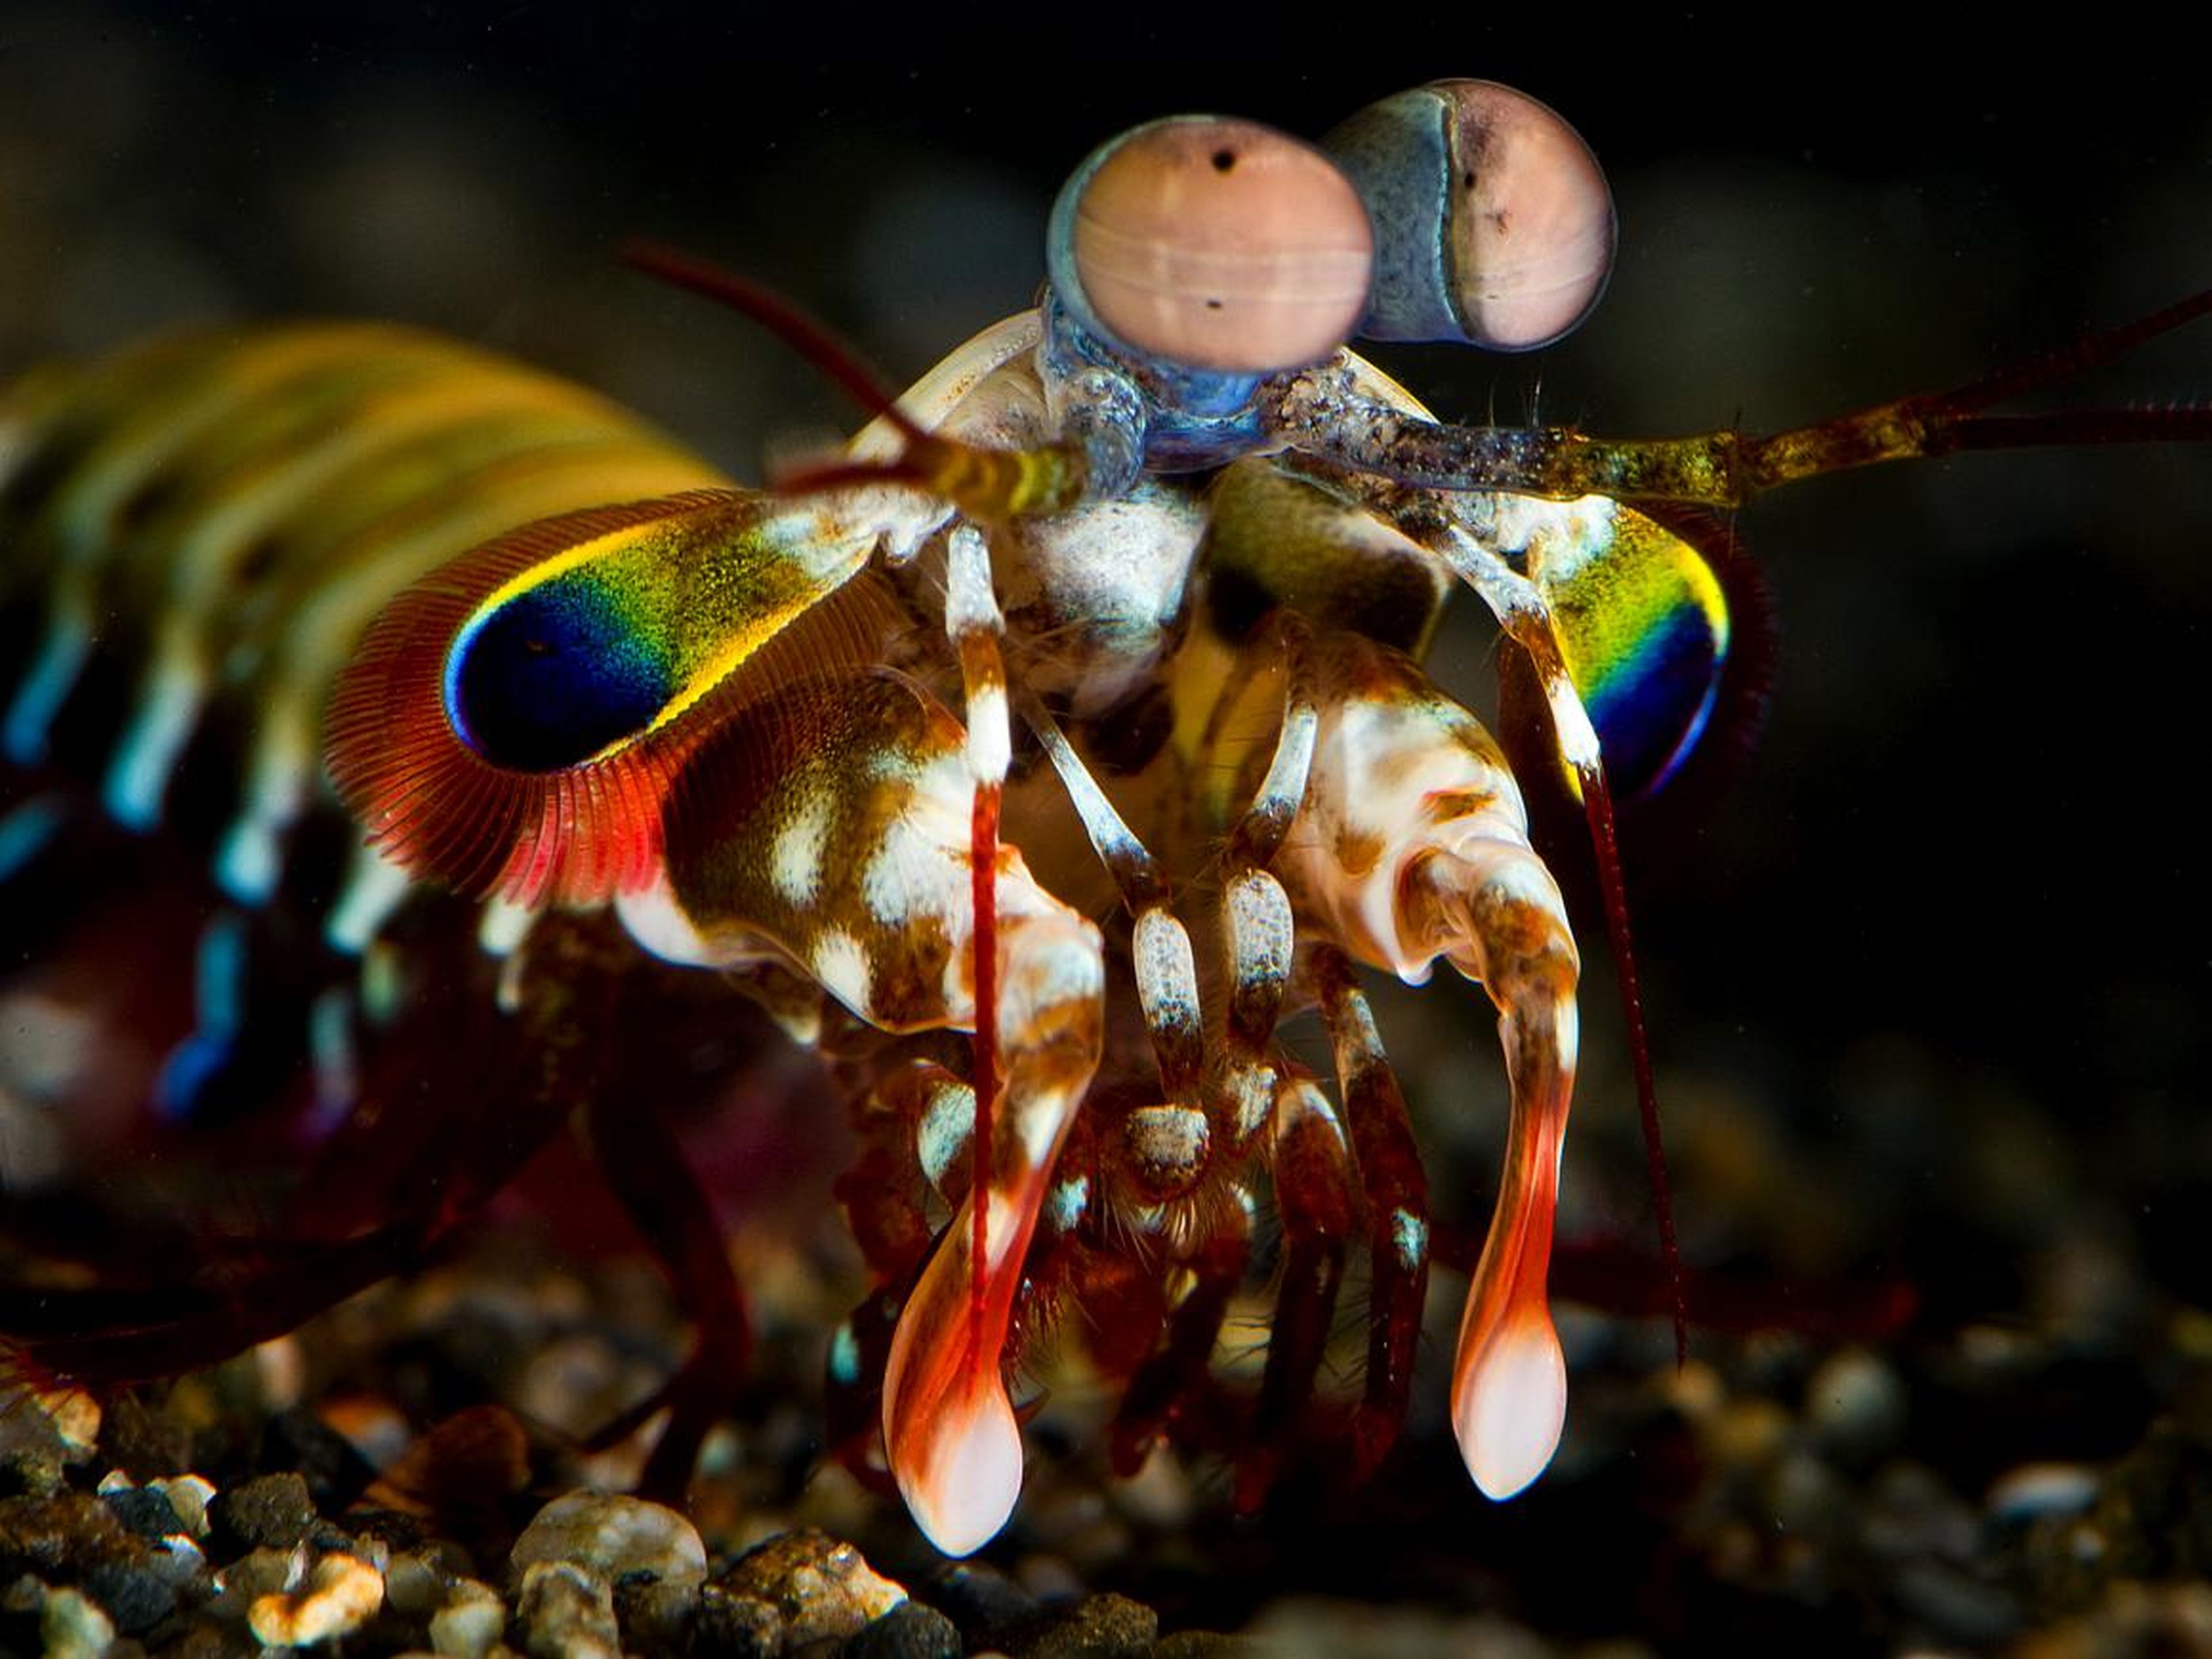 A Mantis Shrimp can punch with the force of a 22-caliber bullet.